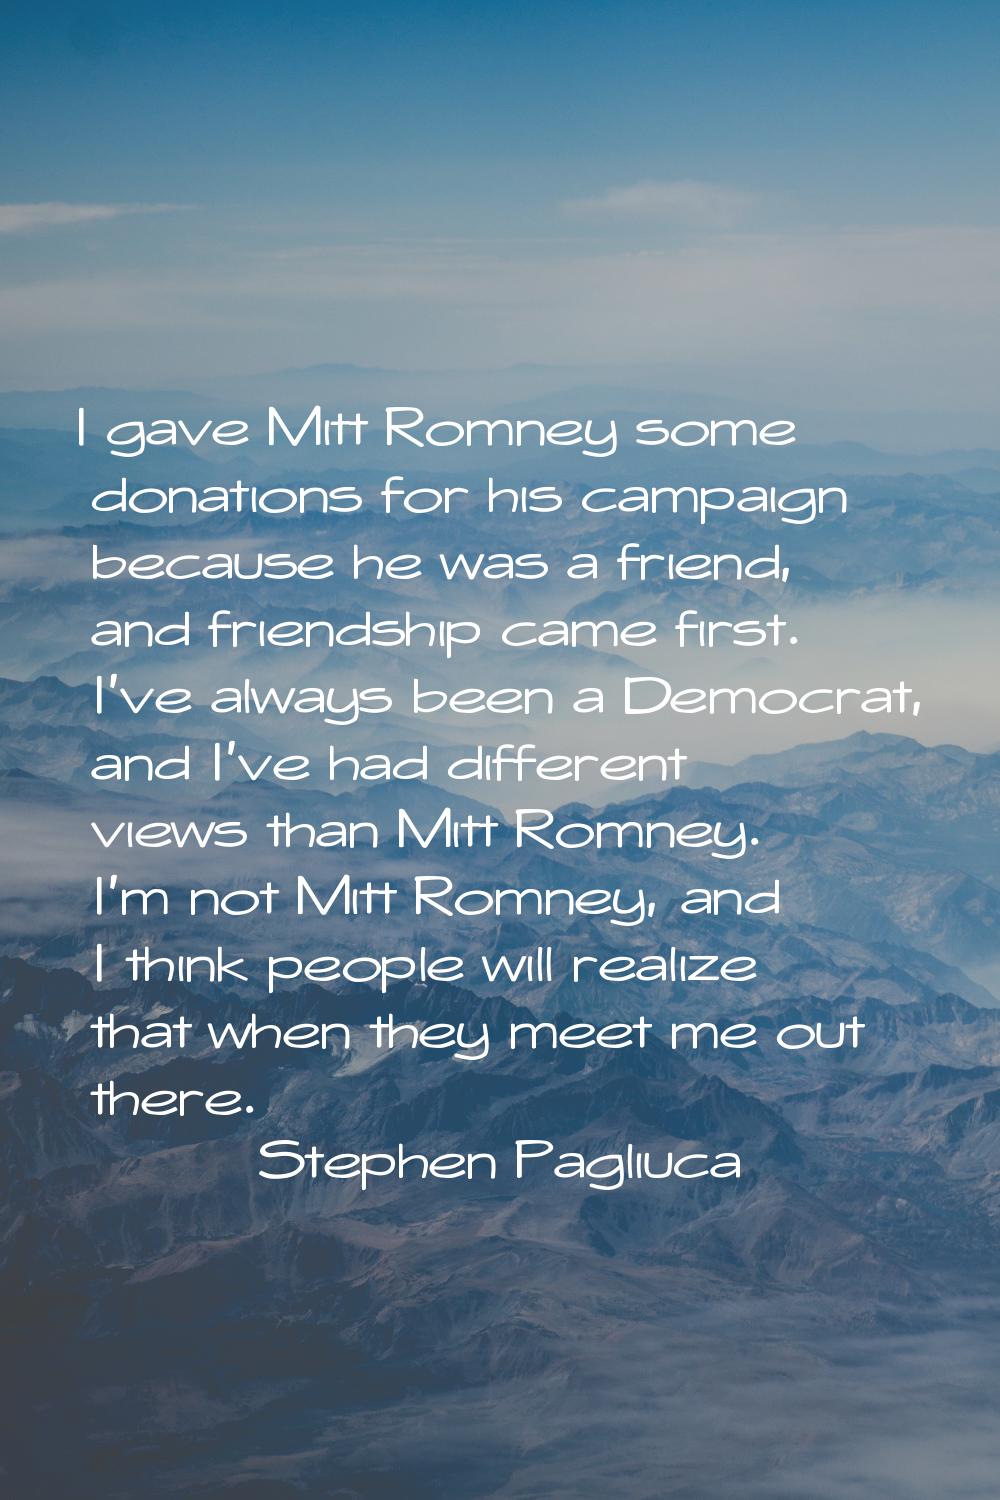 I gave Mitt Romney some donations for his campaign because he was a friend, and friendship came fir